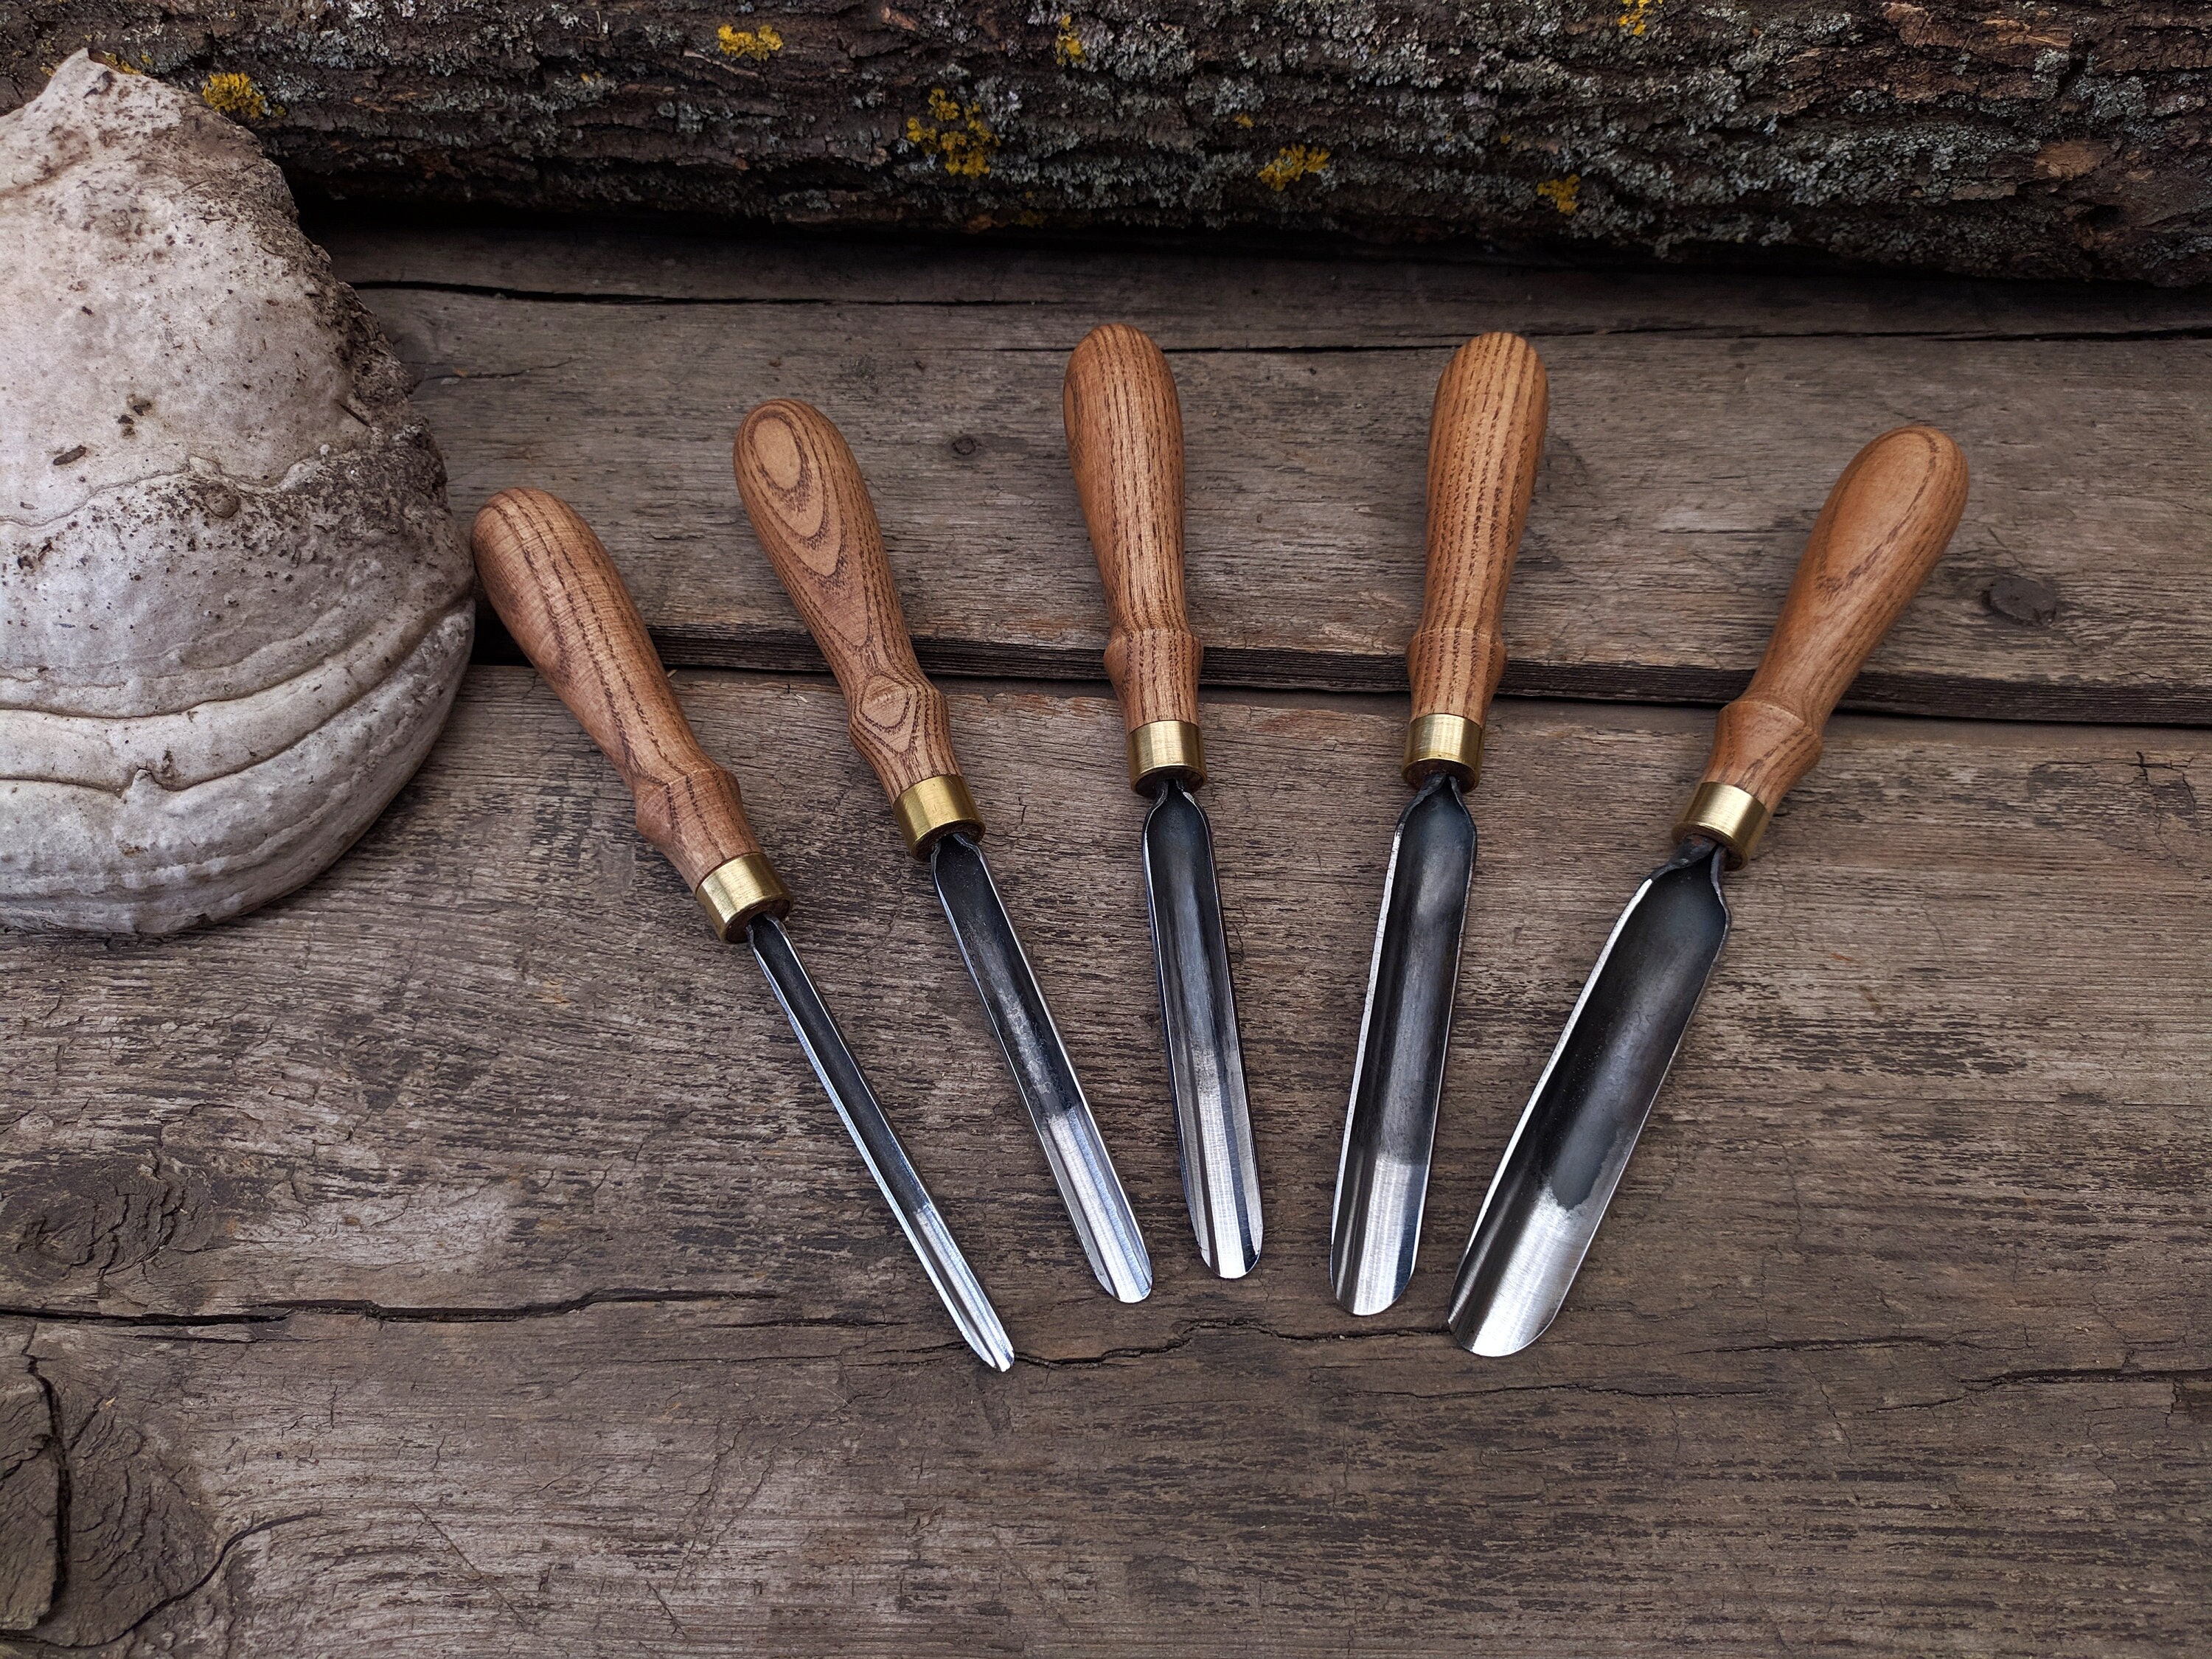 Wood Carving Tools Set 5 PCS. Straight Rounded Chisel. Forged Bent